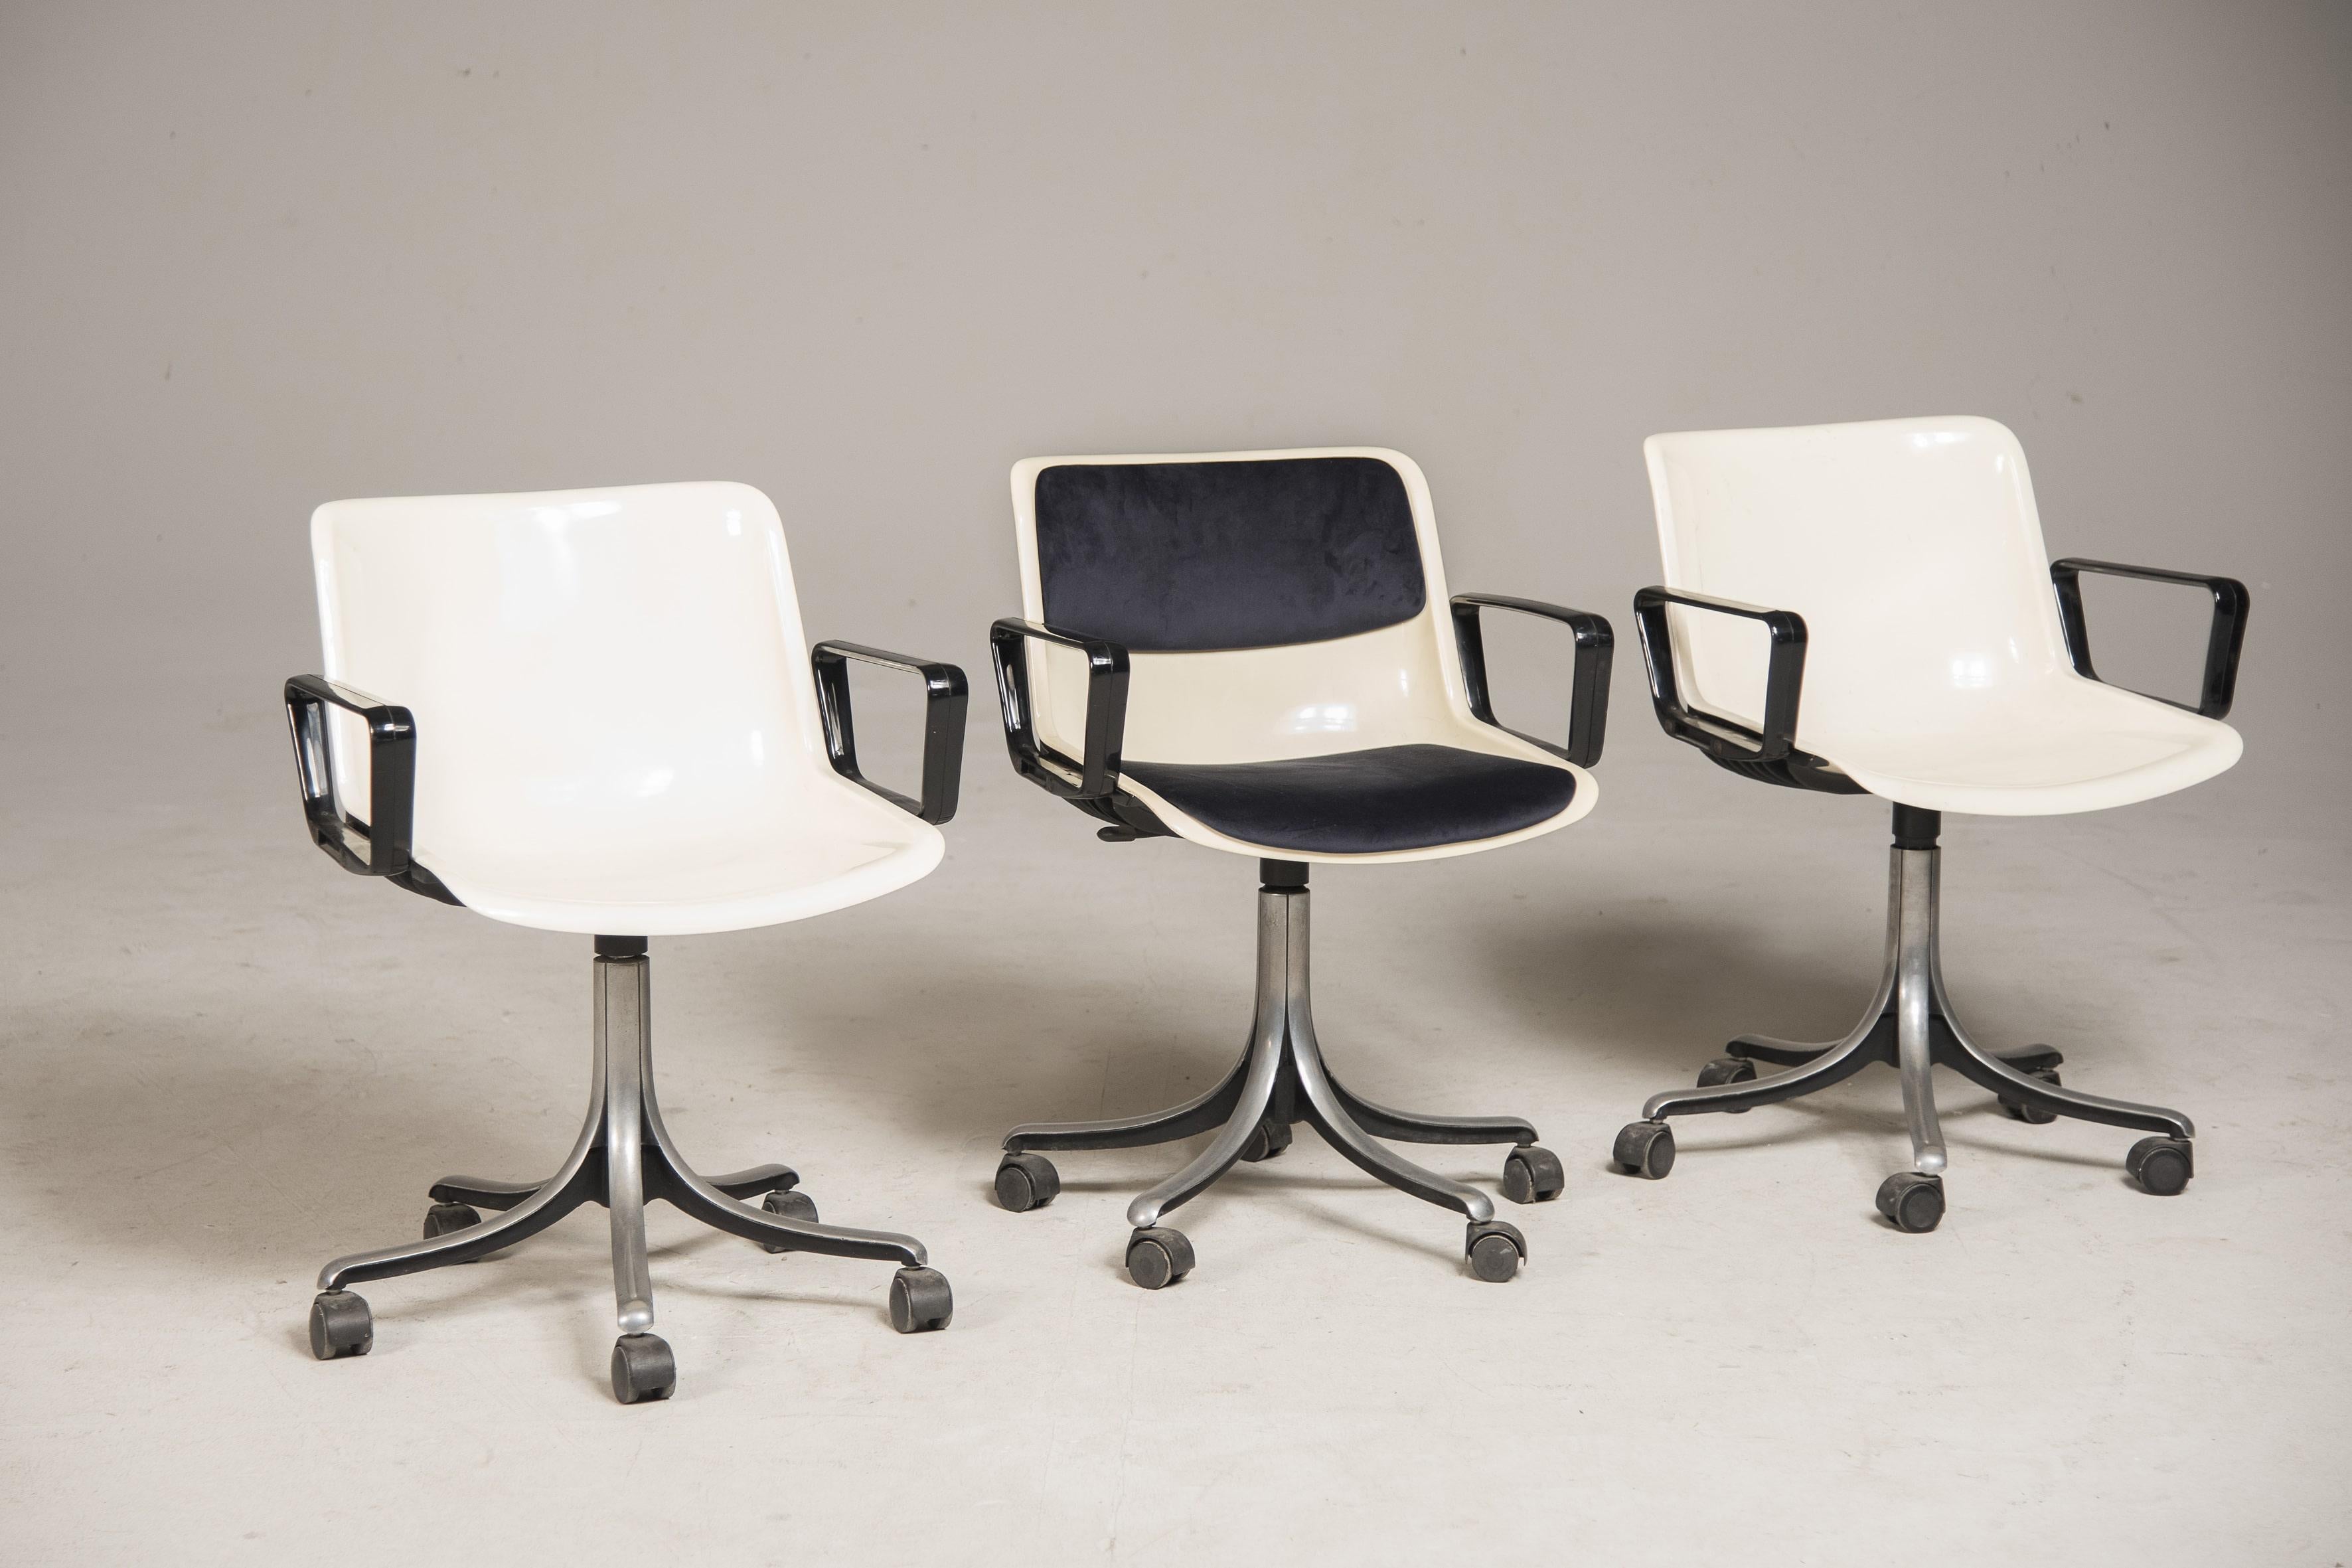 Three Office swivels chair by Osvaldo Borsani for Tecno, made in Italy in 1980s. Stamped on the bottom and marked Tecno on the side. The swivel chairs are made of white plastic. The wheeled base is 5-star metal. The chairs are all original and in